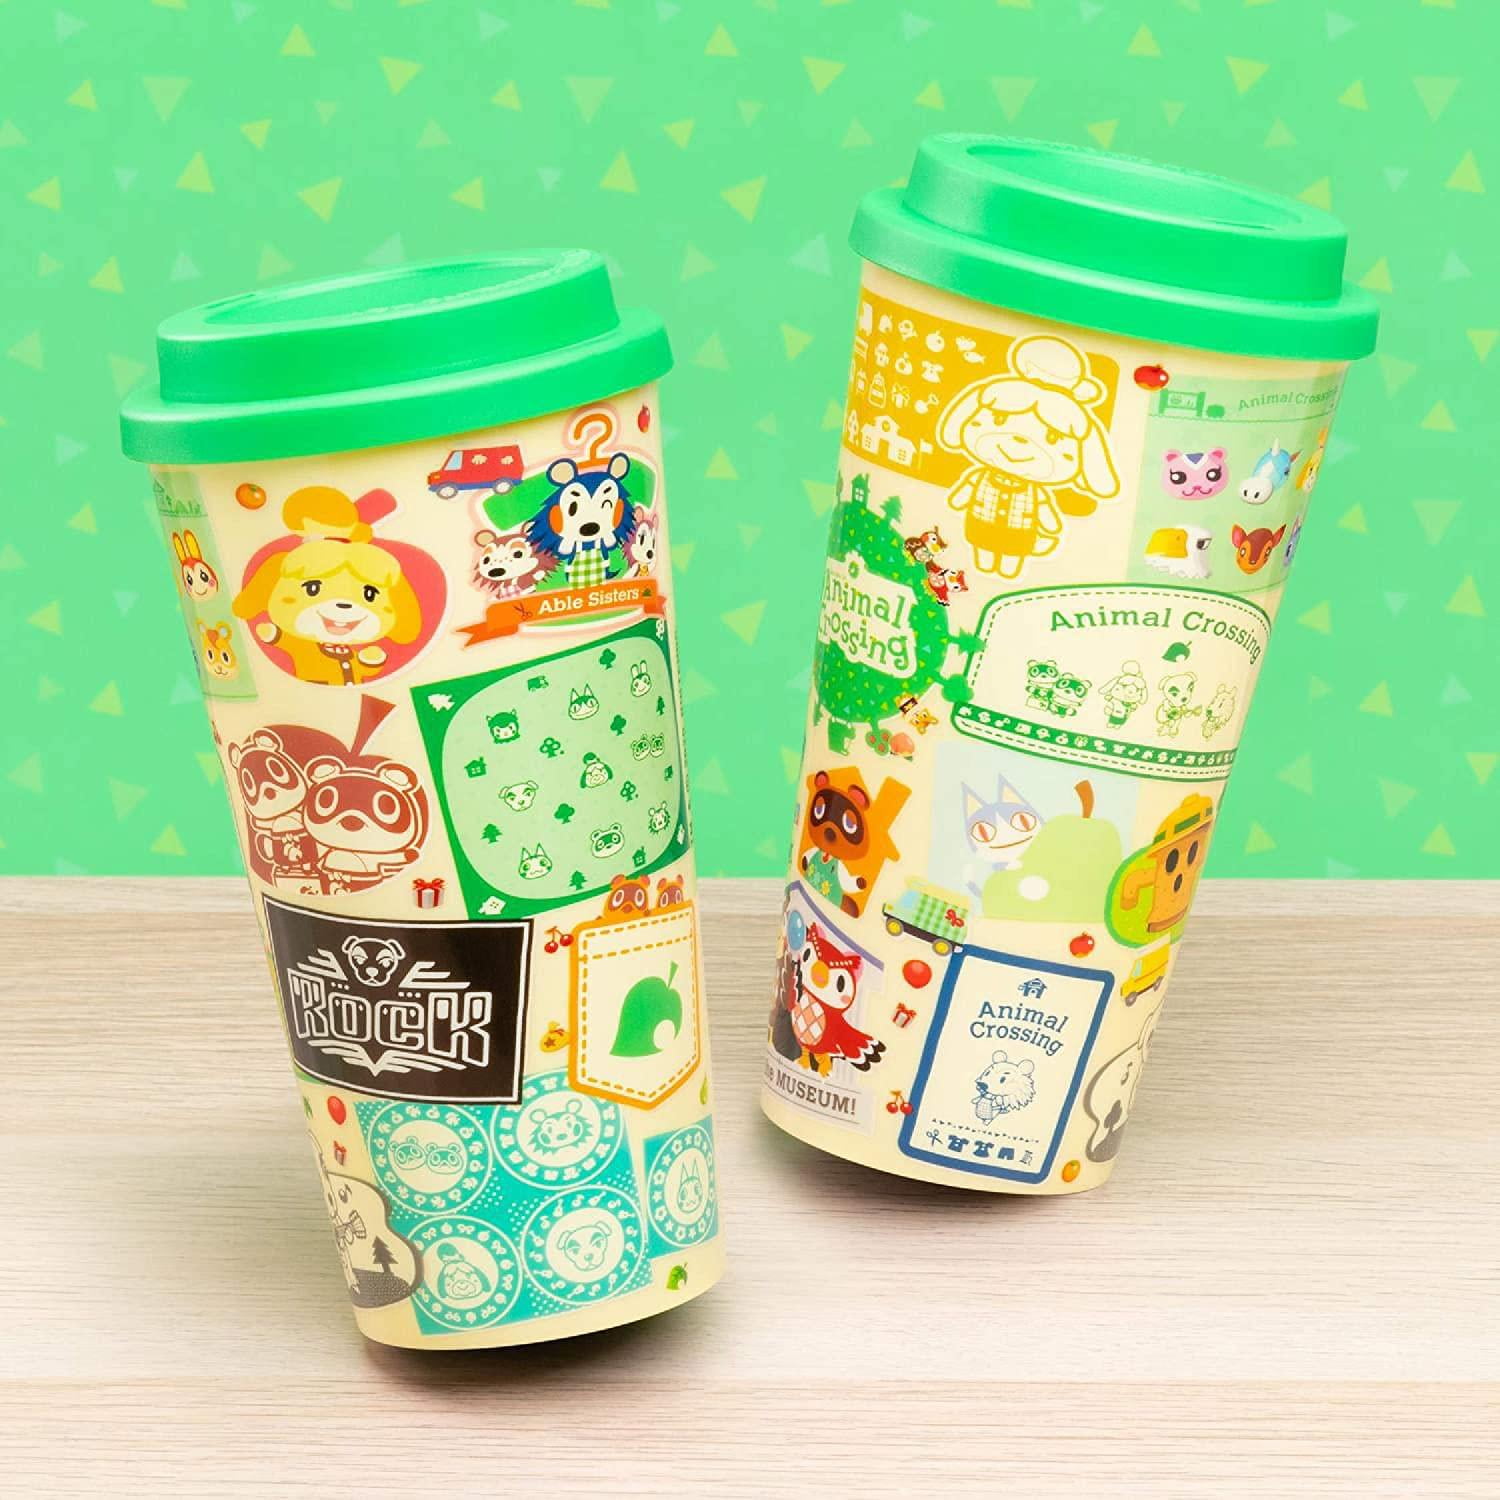  Nintendo Animal Crossing Travel Cups for Adults - Bundle with Animal  Crossing Water Bottle and Animal Crossing Travel Mug Plus Stickers, More